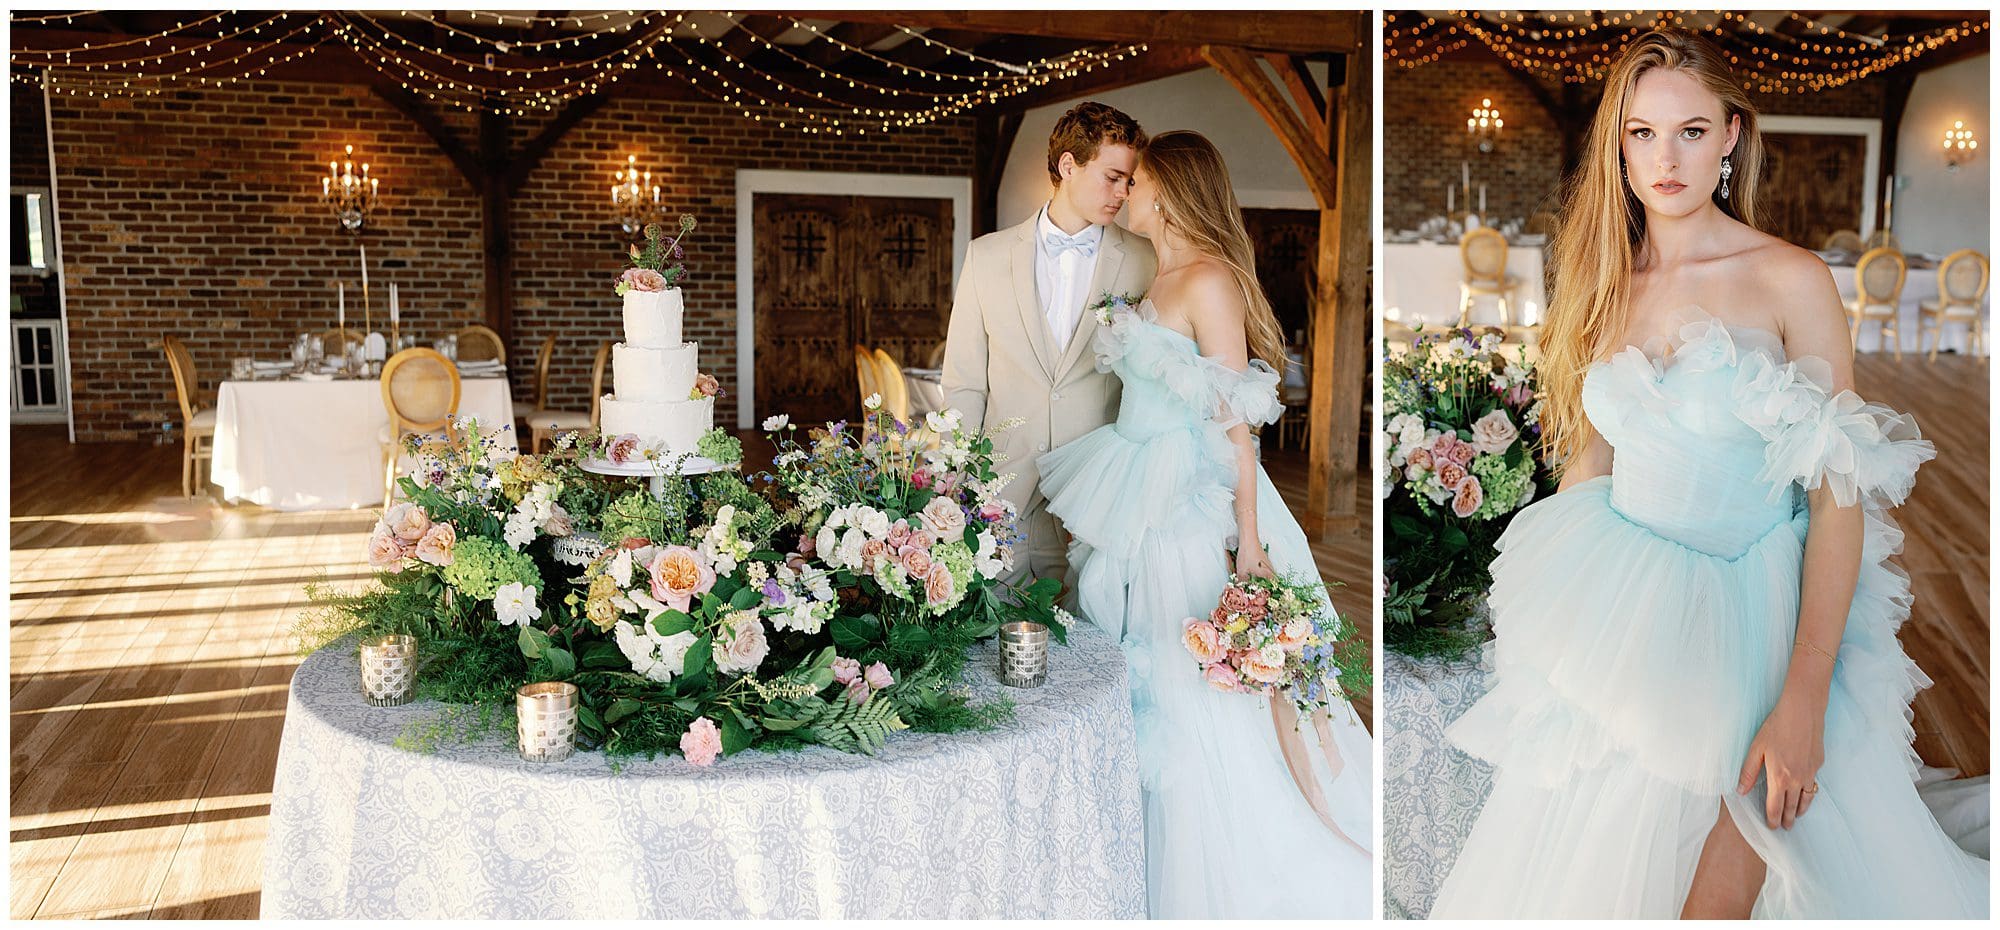 A bride and groom standing next to a Parisian-inspired wedding cake at The Ridge.